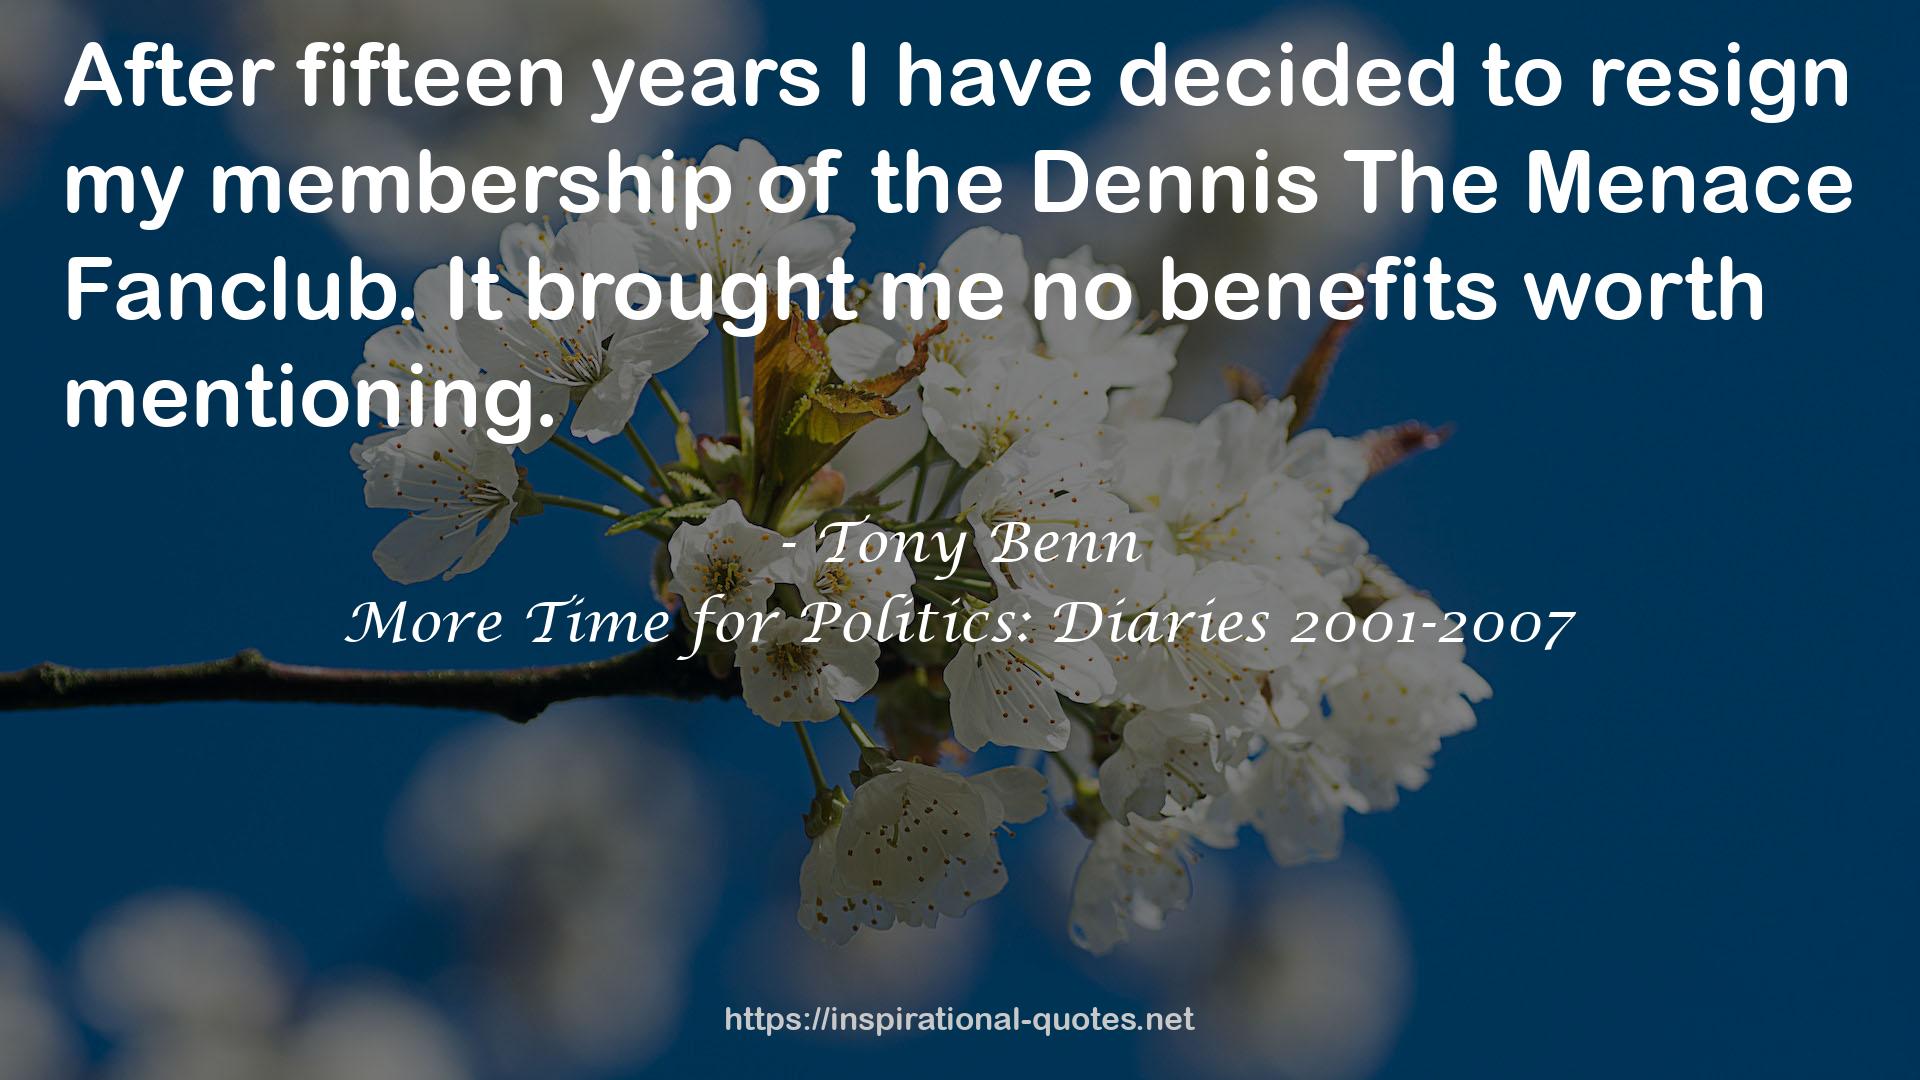 More Time for Politics: Diaries 2001-2007 QUOTES